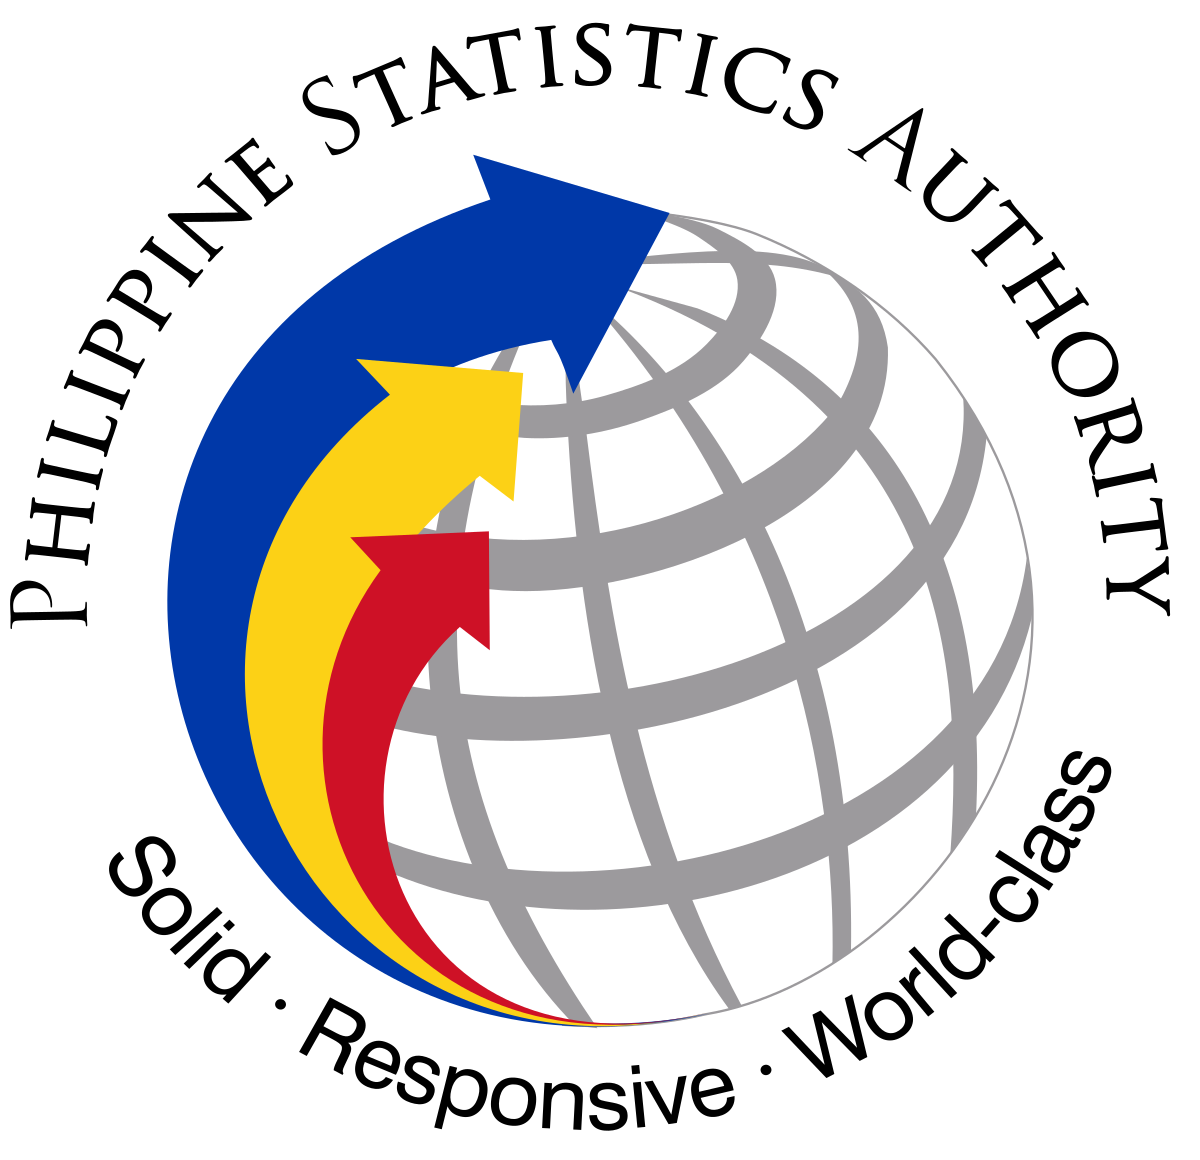 Forms and Guides from National Statistics Office (NSO) Philippines